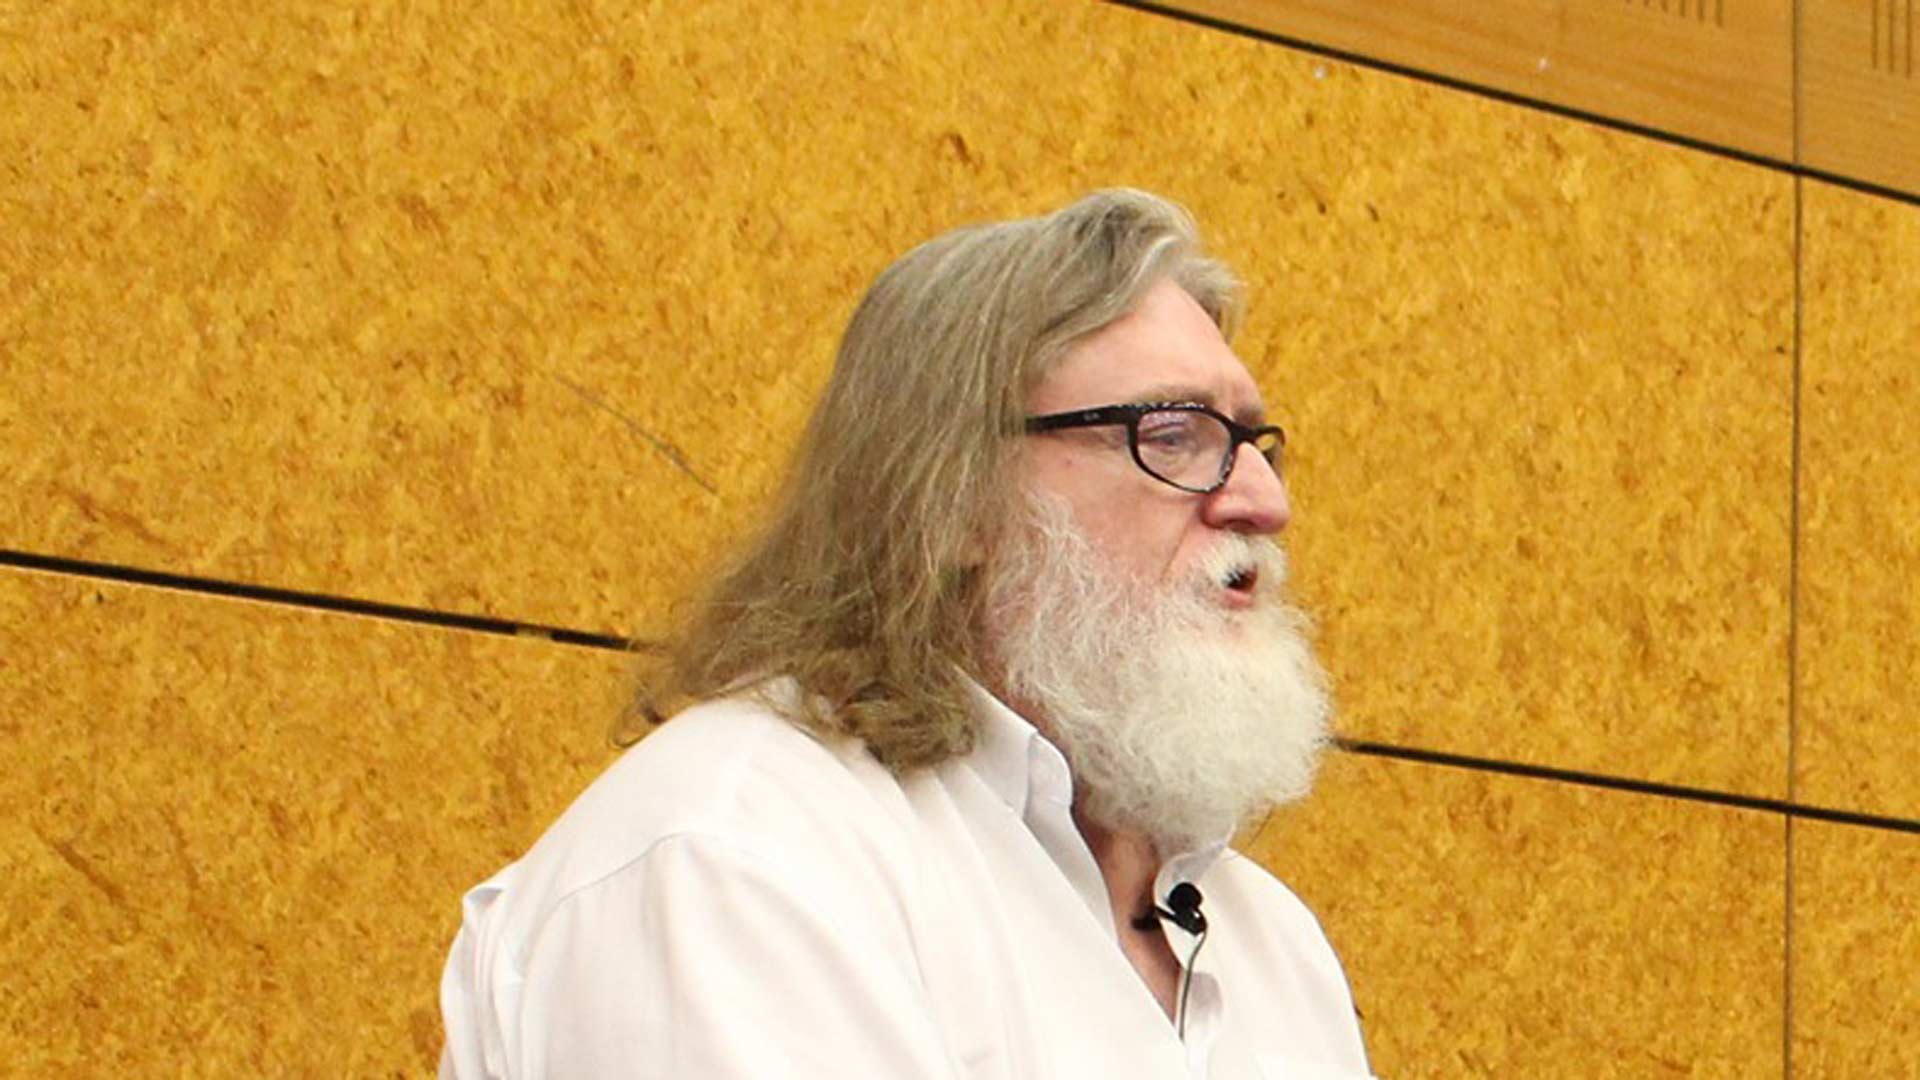 Gabe Newell: The Unconventional Genius Behind Valve and the Gaming